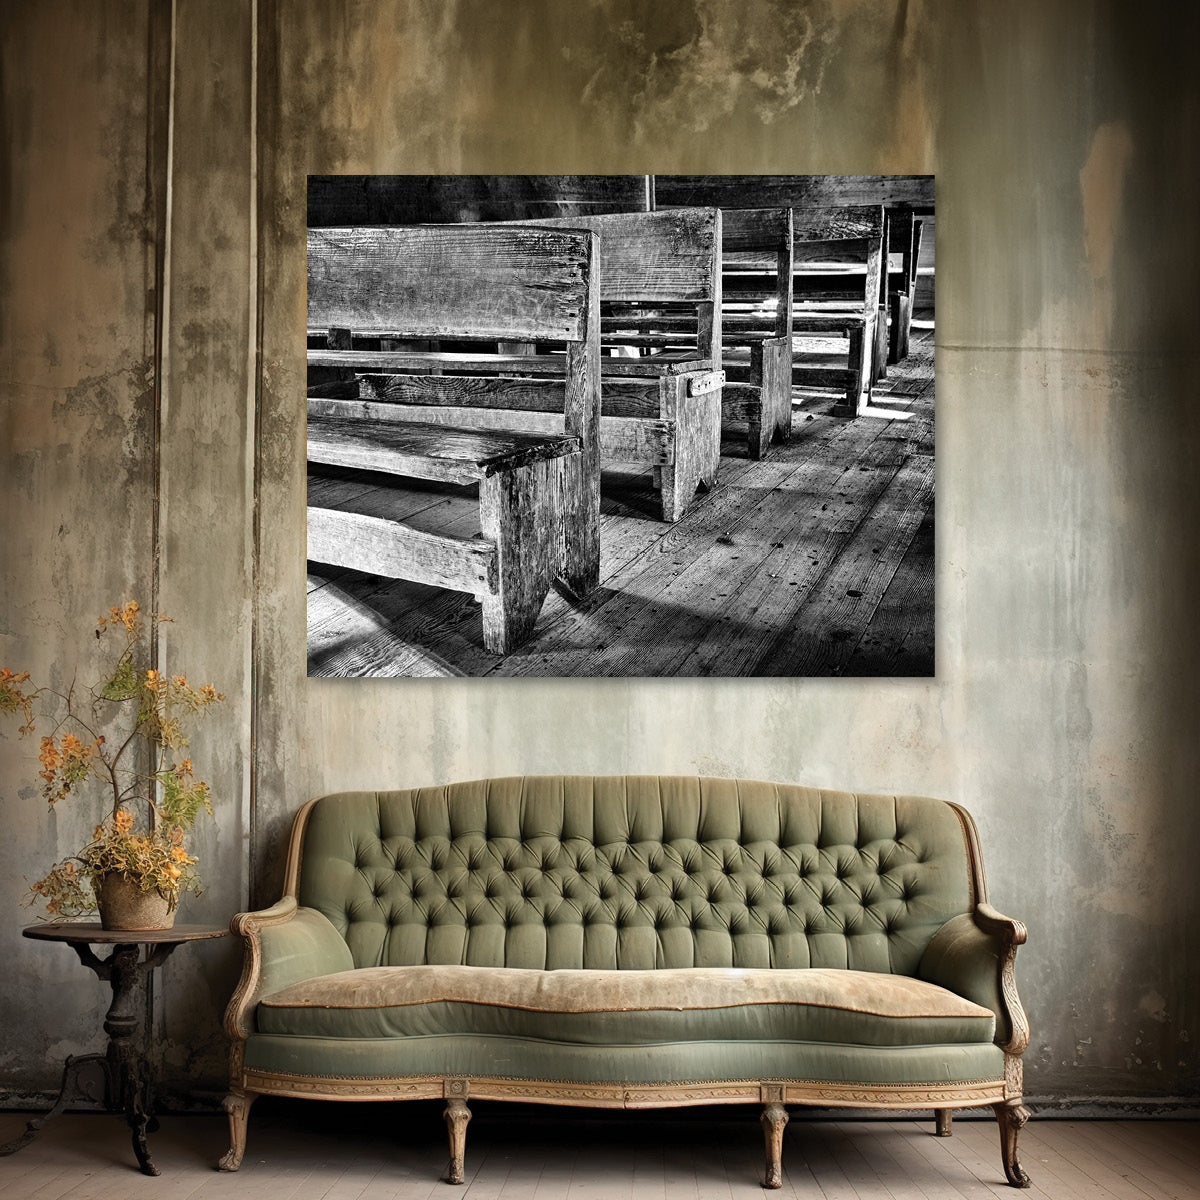 black and white church pew bedroom art